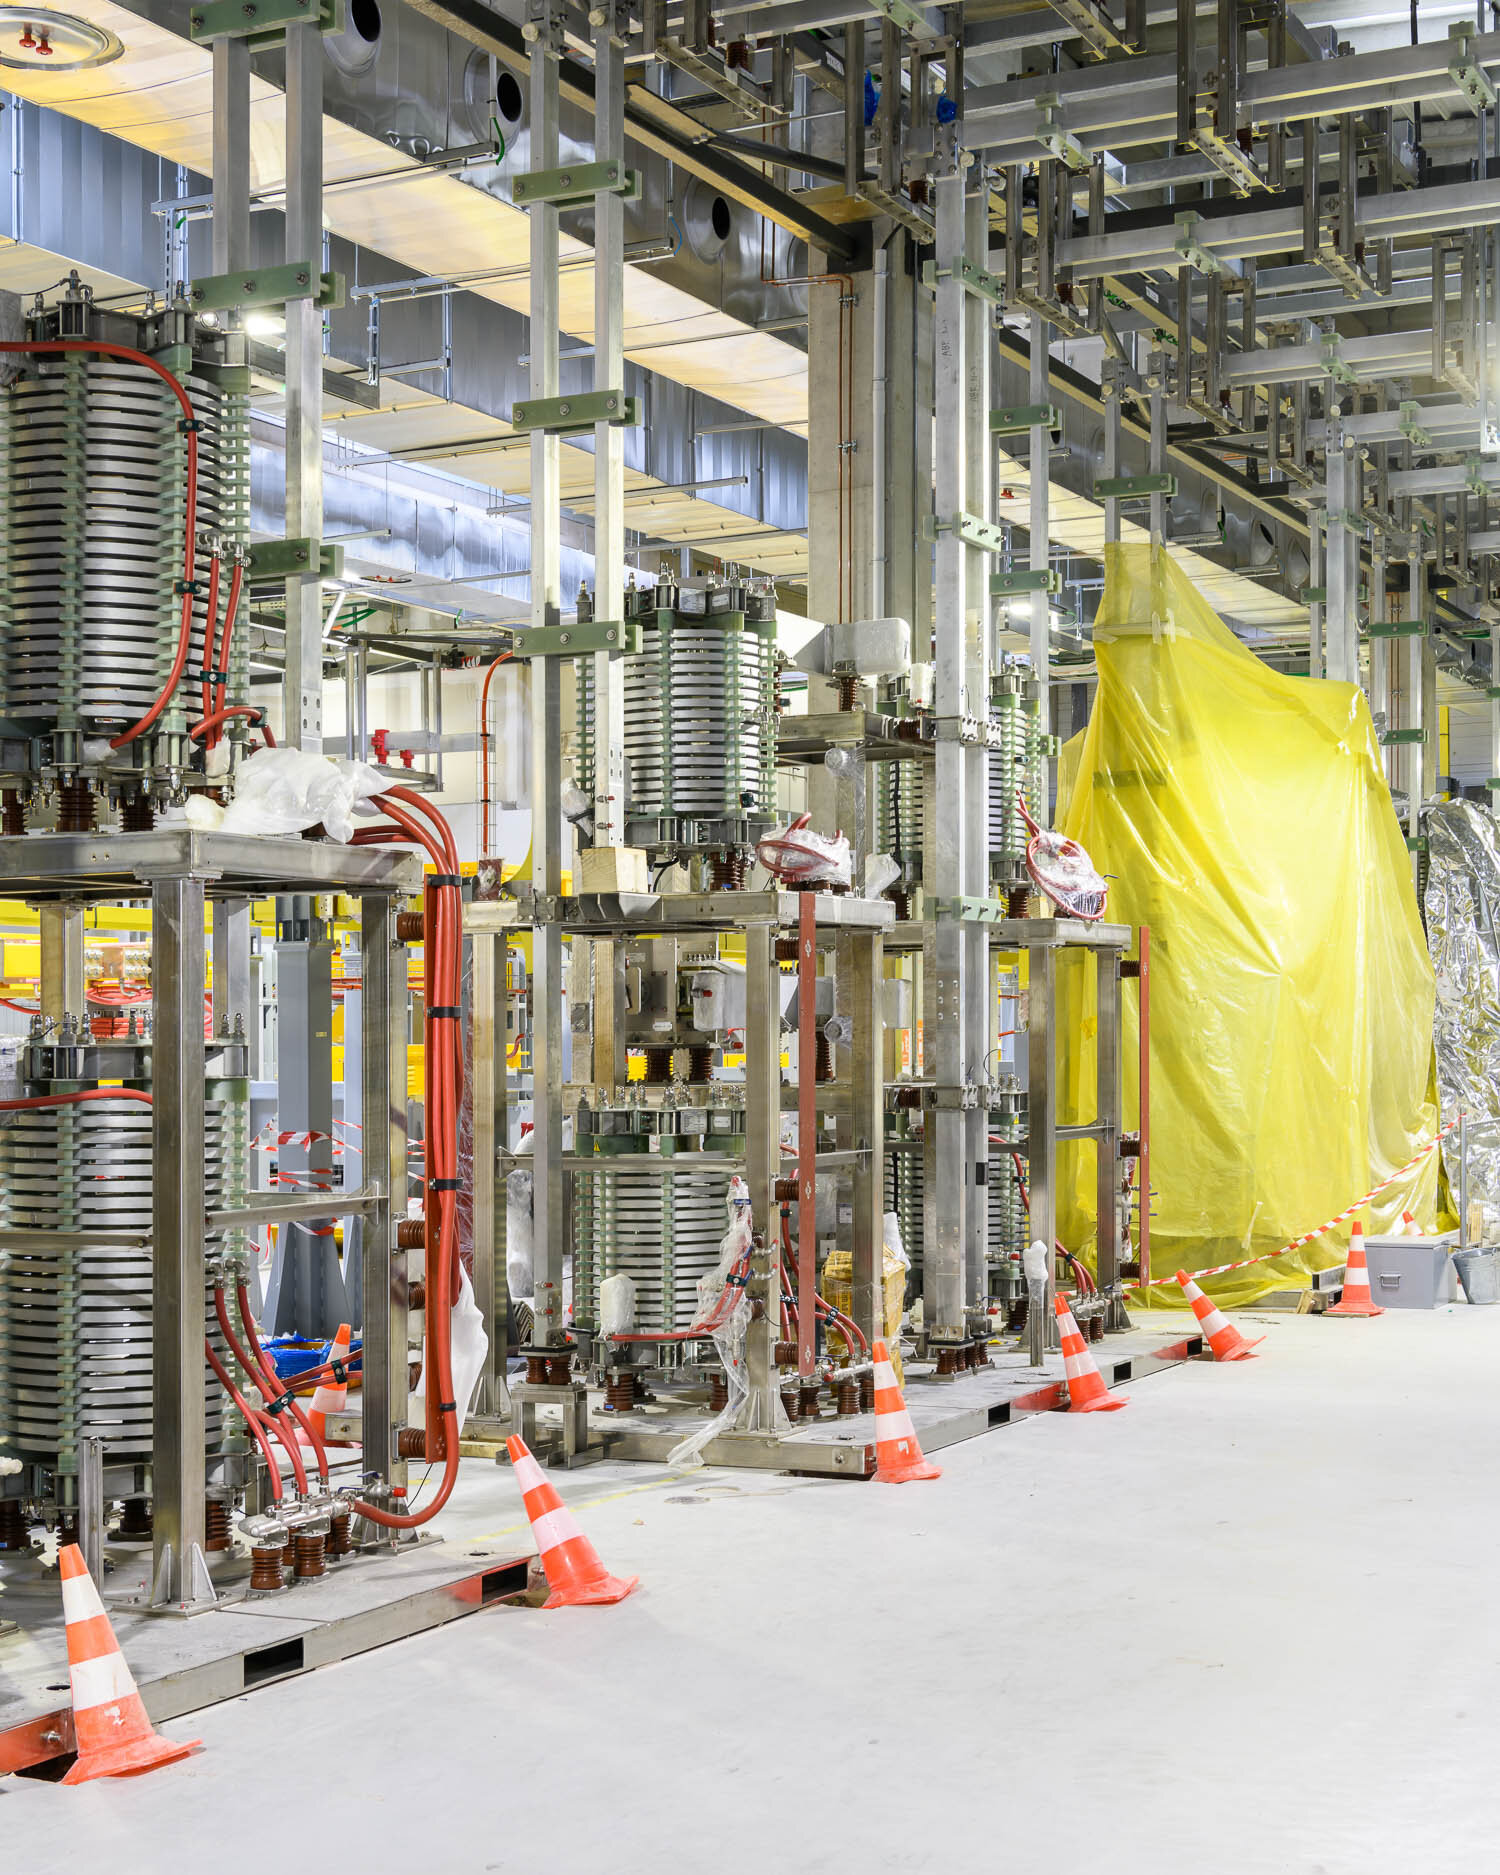  Magnet Power Conversion building at ITER 